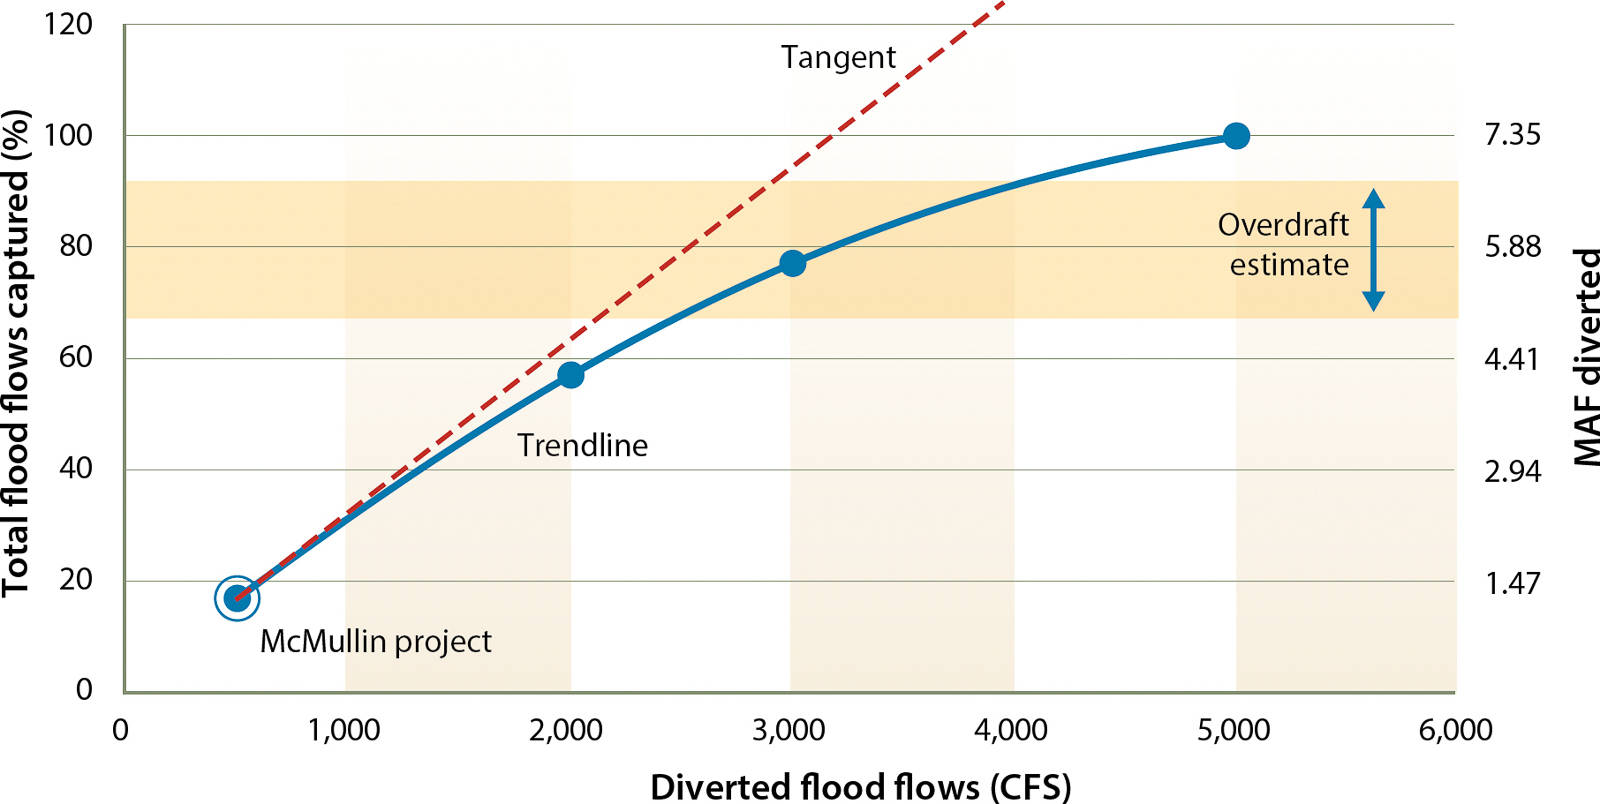 The McMullin Project, if operational at build-out capacity (capable of diverting 500 CFS) since 1980, would have been able to capture nearly 20% (1.47 MAF) of the total available surplus flood flows (7.35 MAF) in the James Bypass from 1980 through 2009. We estimate that four equivalent projects (capable of diverting 2,000 CFS total), would have the capacity to capture 60% (4.41 MAF) of flood flows. As more capacity is added, diminishing returns occur because there are fewer flood events large enough to fill the recharge system to full capacity. Flow data source: USGS 2010. Overdraft estimate from WRIME (2006a) and KRCD (2013).